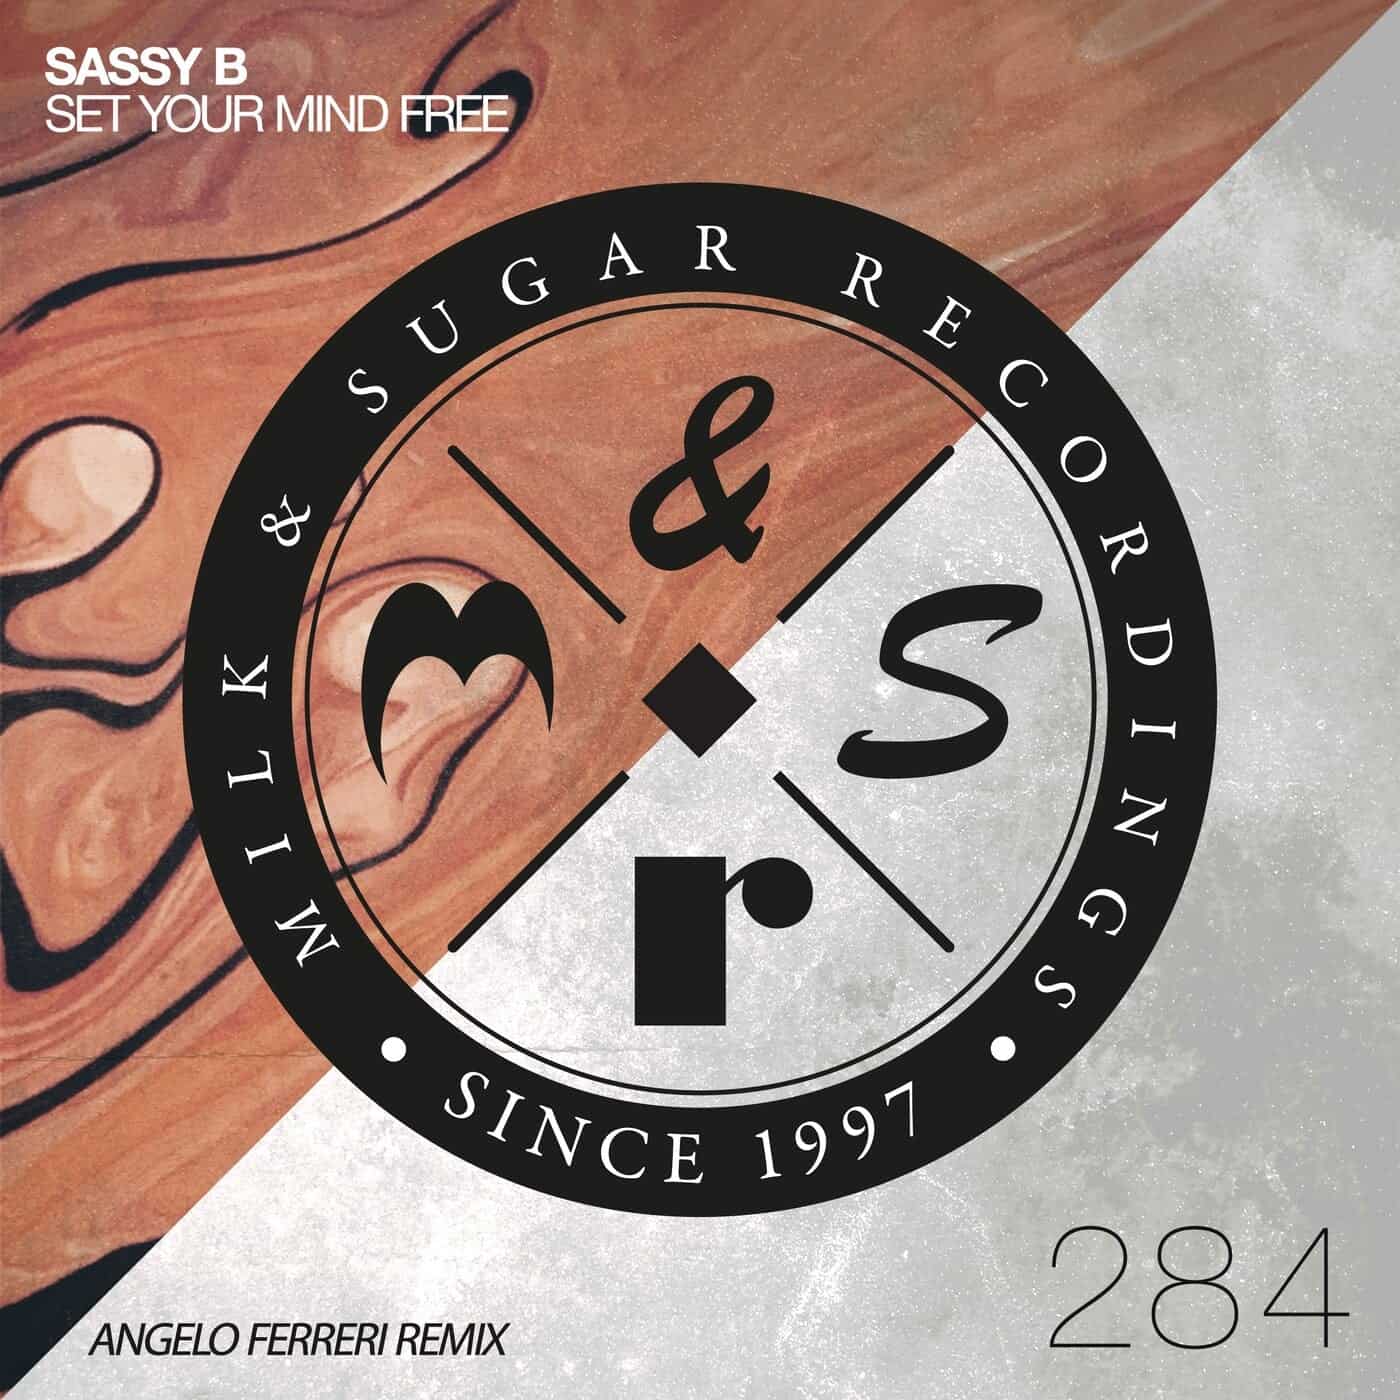 image cover: Set Your Mind Free (Incl. Angelo Ferreri Remix) by Sassy B on Milk & Sugar